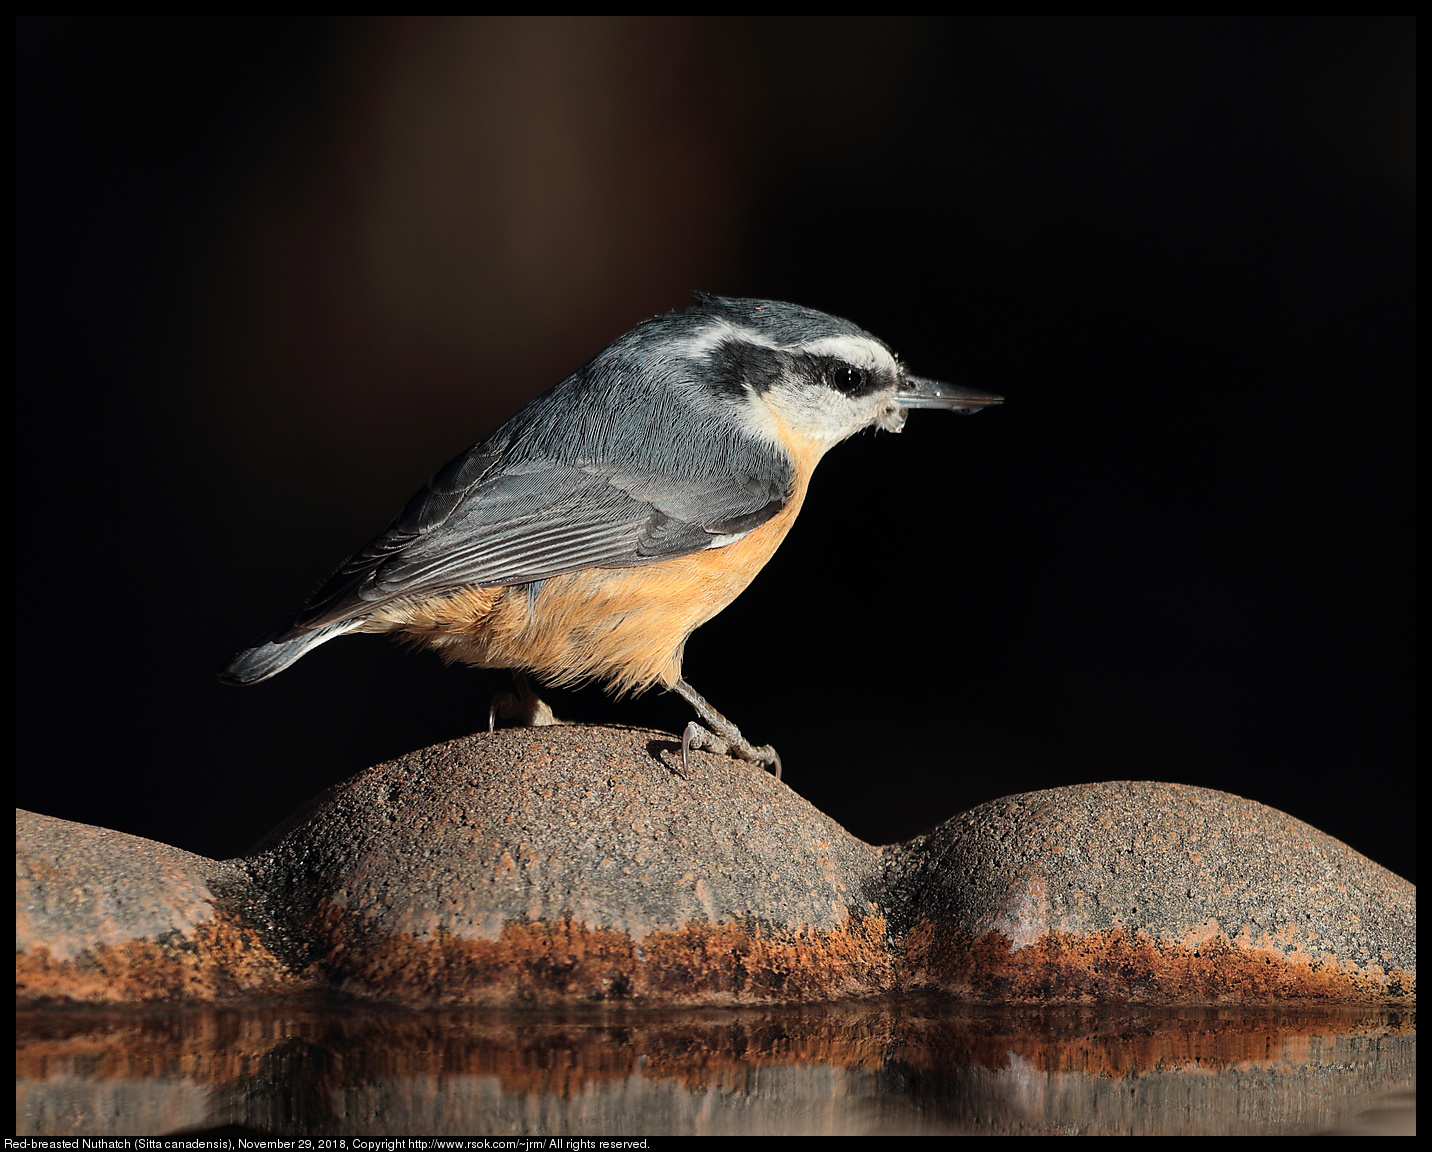 Red-breasted Nuthatch (Sitta canadensis), November 29, 2018